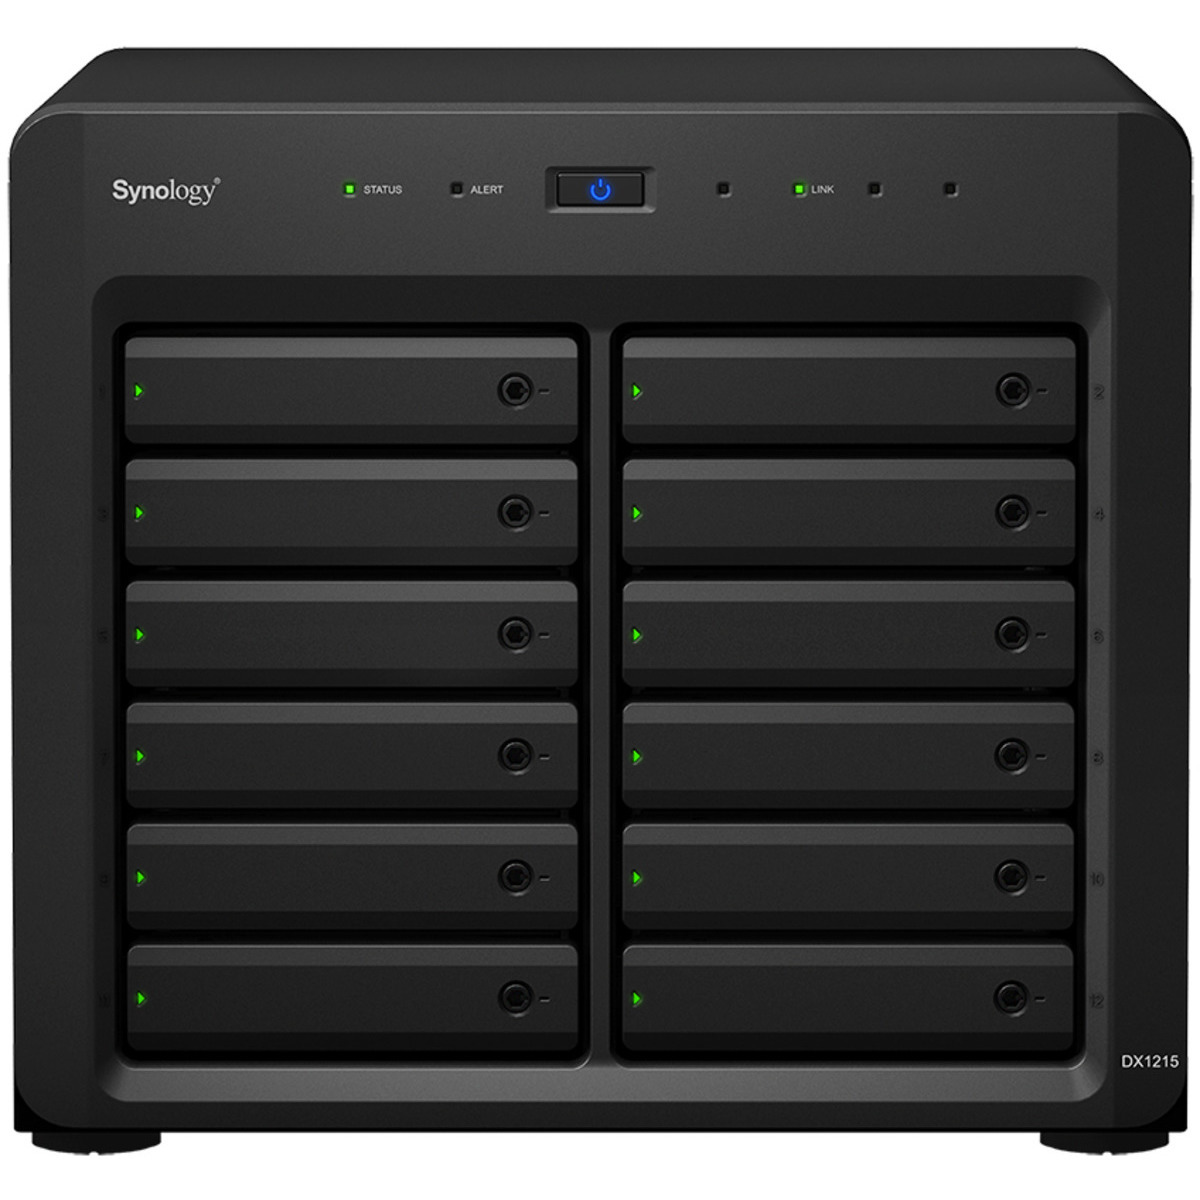 Synology DX1215II External Expansion Drive 144tb 12-Bay Desktop Multimedia / Power User / Business Expansion Enclosure 8x18tb Western Digital Ultrastar DC HC550 WUH721818ALE6L4 3.5 7200rpm SATA 6Gb/s HDD ENTERPRISE Class Drives Installed - Burn-In Tested DX1215II External Expansion Drive